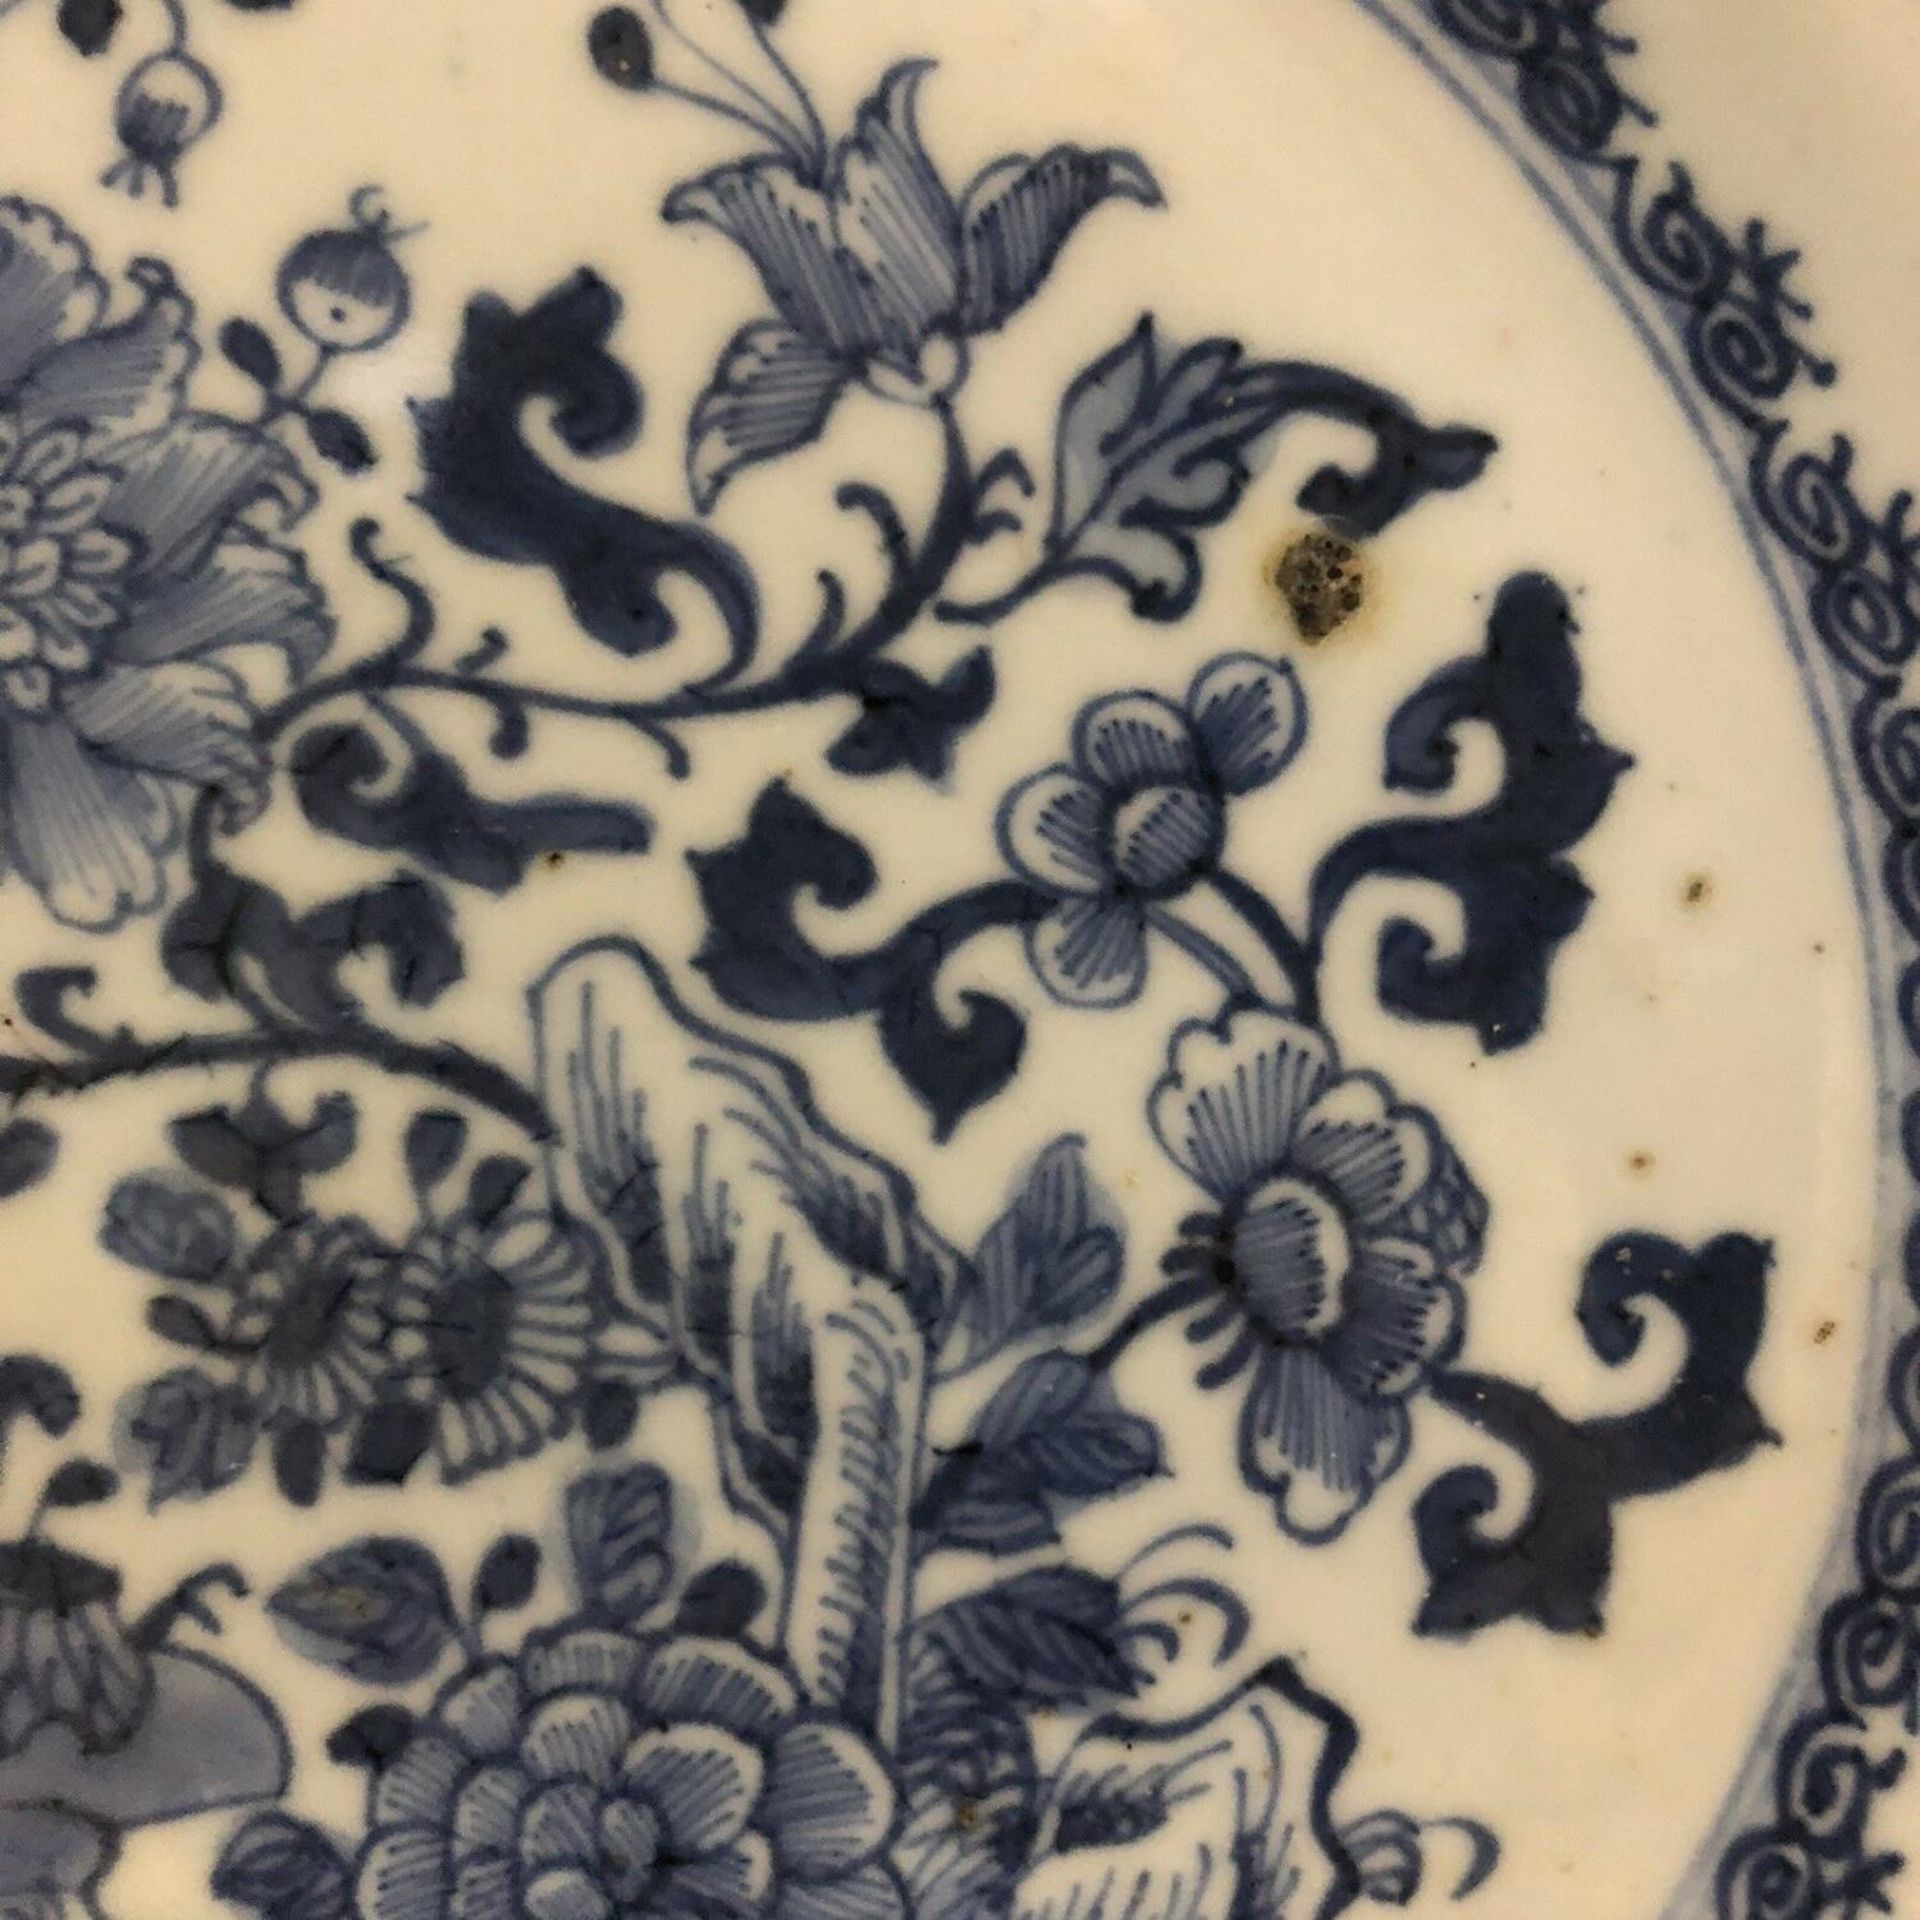 An 18th century Chinese blue and white plate with trees moths & precious objects - Image 4 of 8